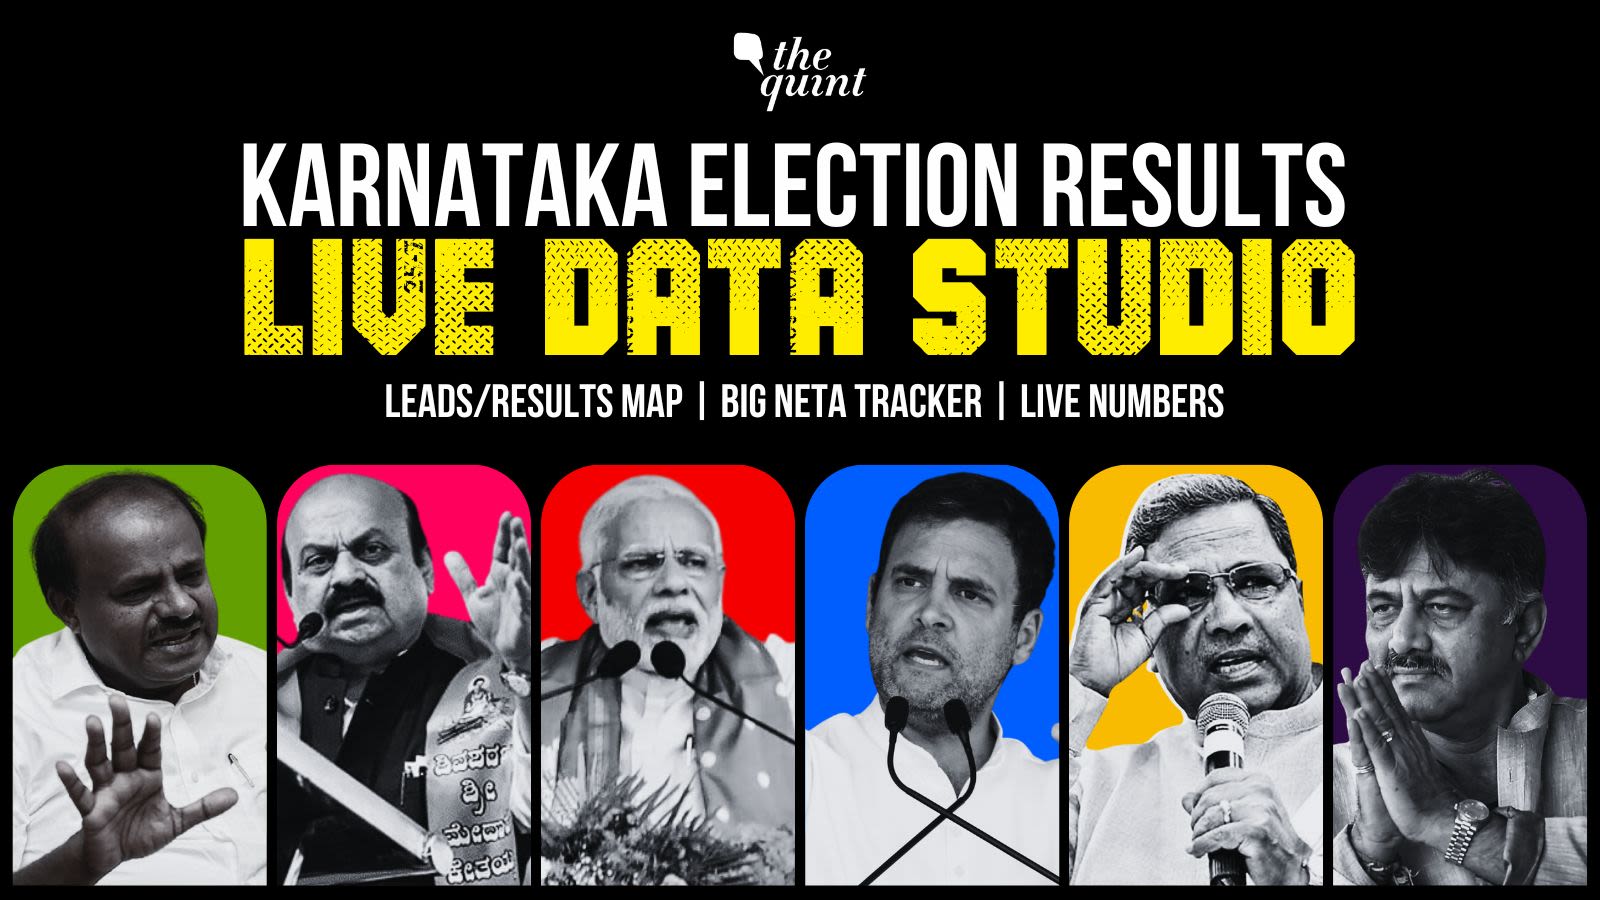 Karnataka Election Results 2023 LIVE Data Studio by The Quint on